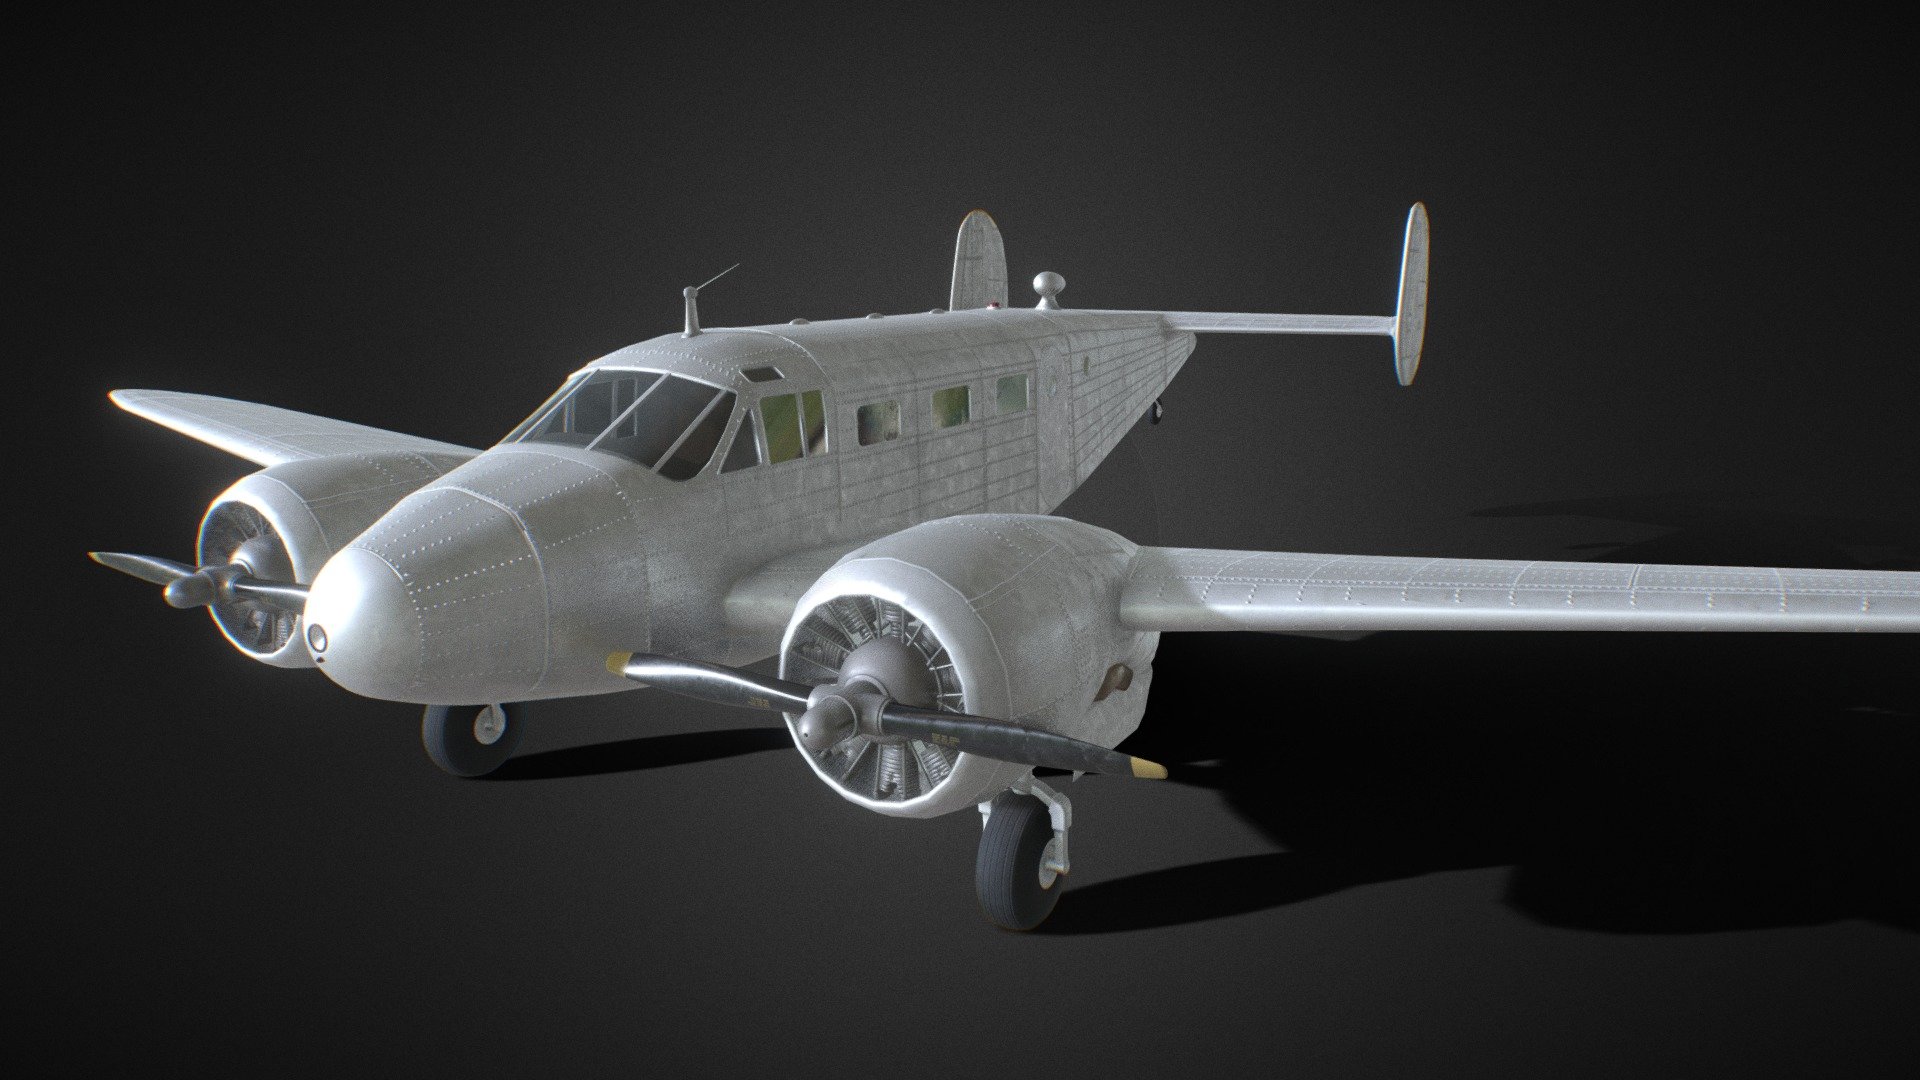 Beechcraft Model 18 - 3d model 

The Beechcraft Model 18 is a 6- to 11-seat, twin-engined, low-wing, tailwheel light aircraft manufactured by the Beech Aircraft Corporation. 

I made the textures in quixel mixer. Tested it in unreal engine 5.

HAVE : 





4k Texture (PBR) 




7 materials




2+1 kinds of colors




UVs Rig (armature) interior




132 500 Vertices (262 000 polygons)



DOES NOT HAVE AN INTERIOR

formats: -blend -obj -fbx -dae -stl - Aircraft - Beechcraft Model 18 - Buy Royalty Free 3D model by vojtech.vejtasa 3d model